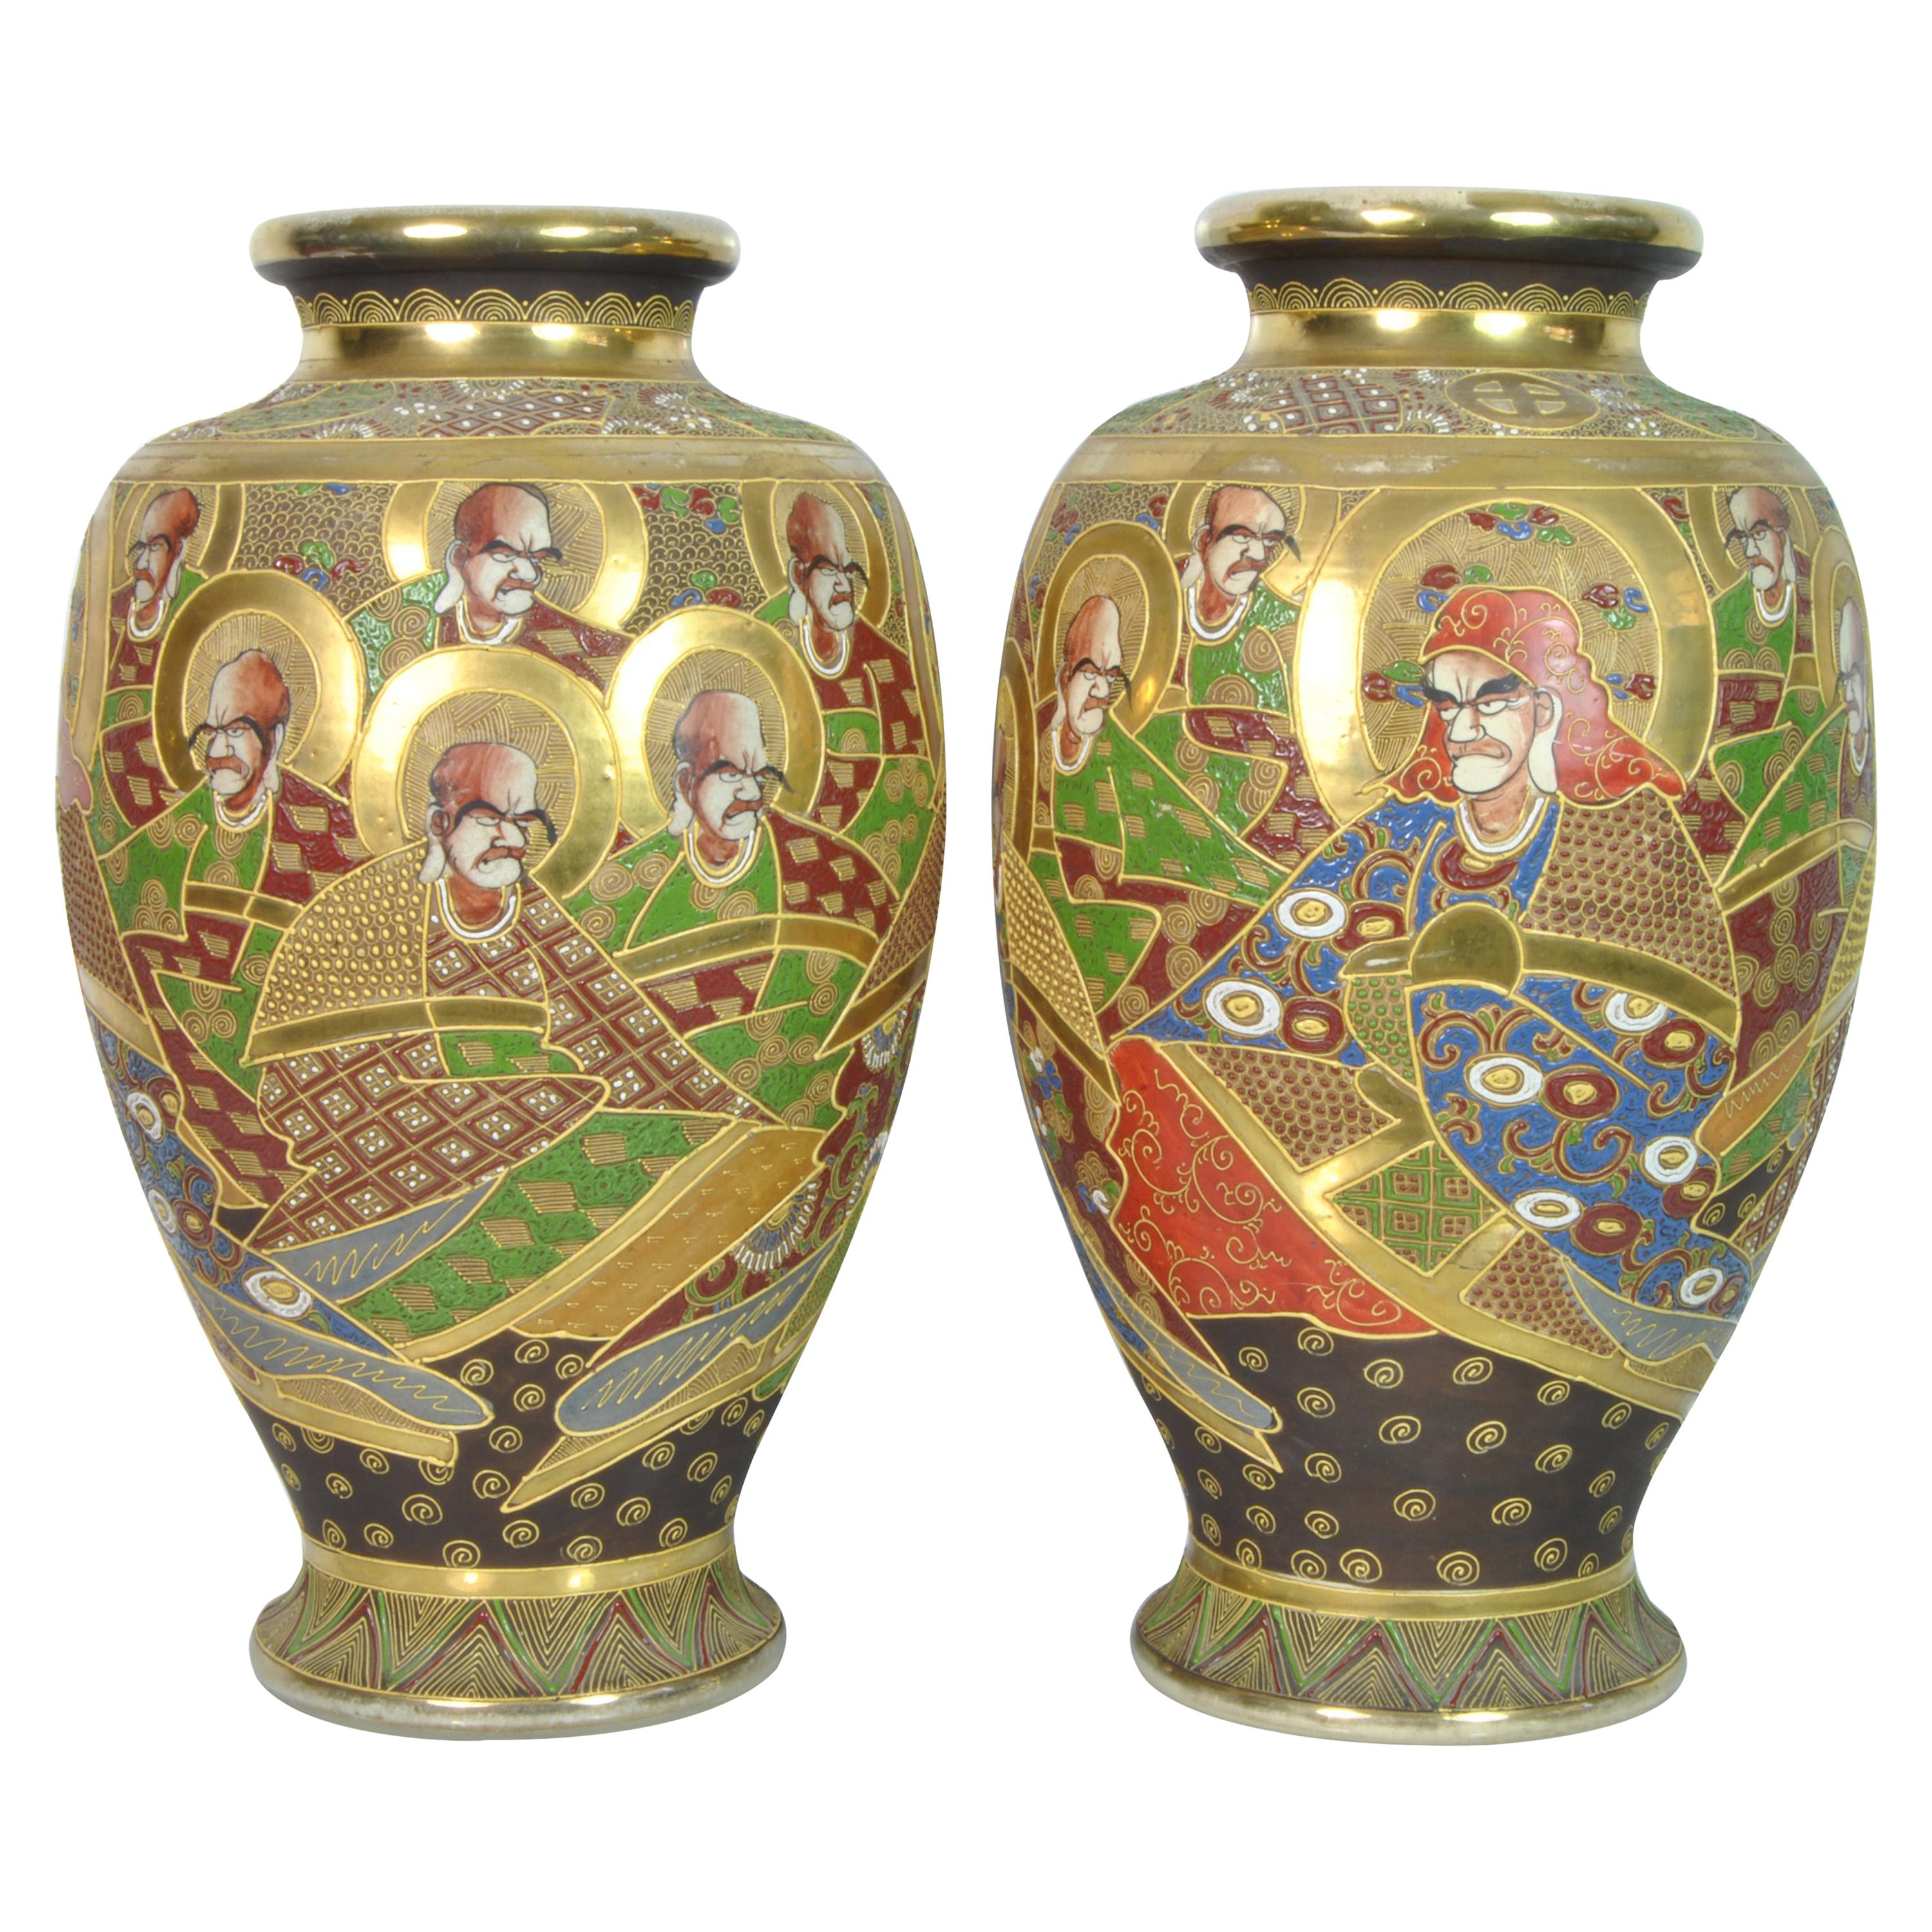 Pair of Beautiful Vases with Gold Decorations Japan 1900 Imperial Satsuma